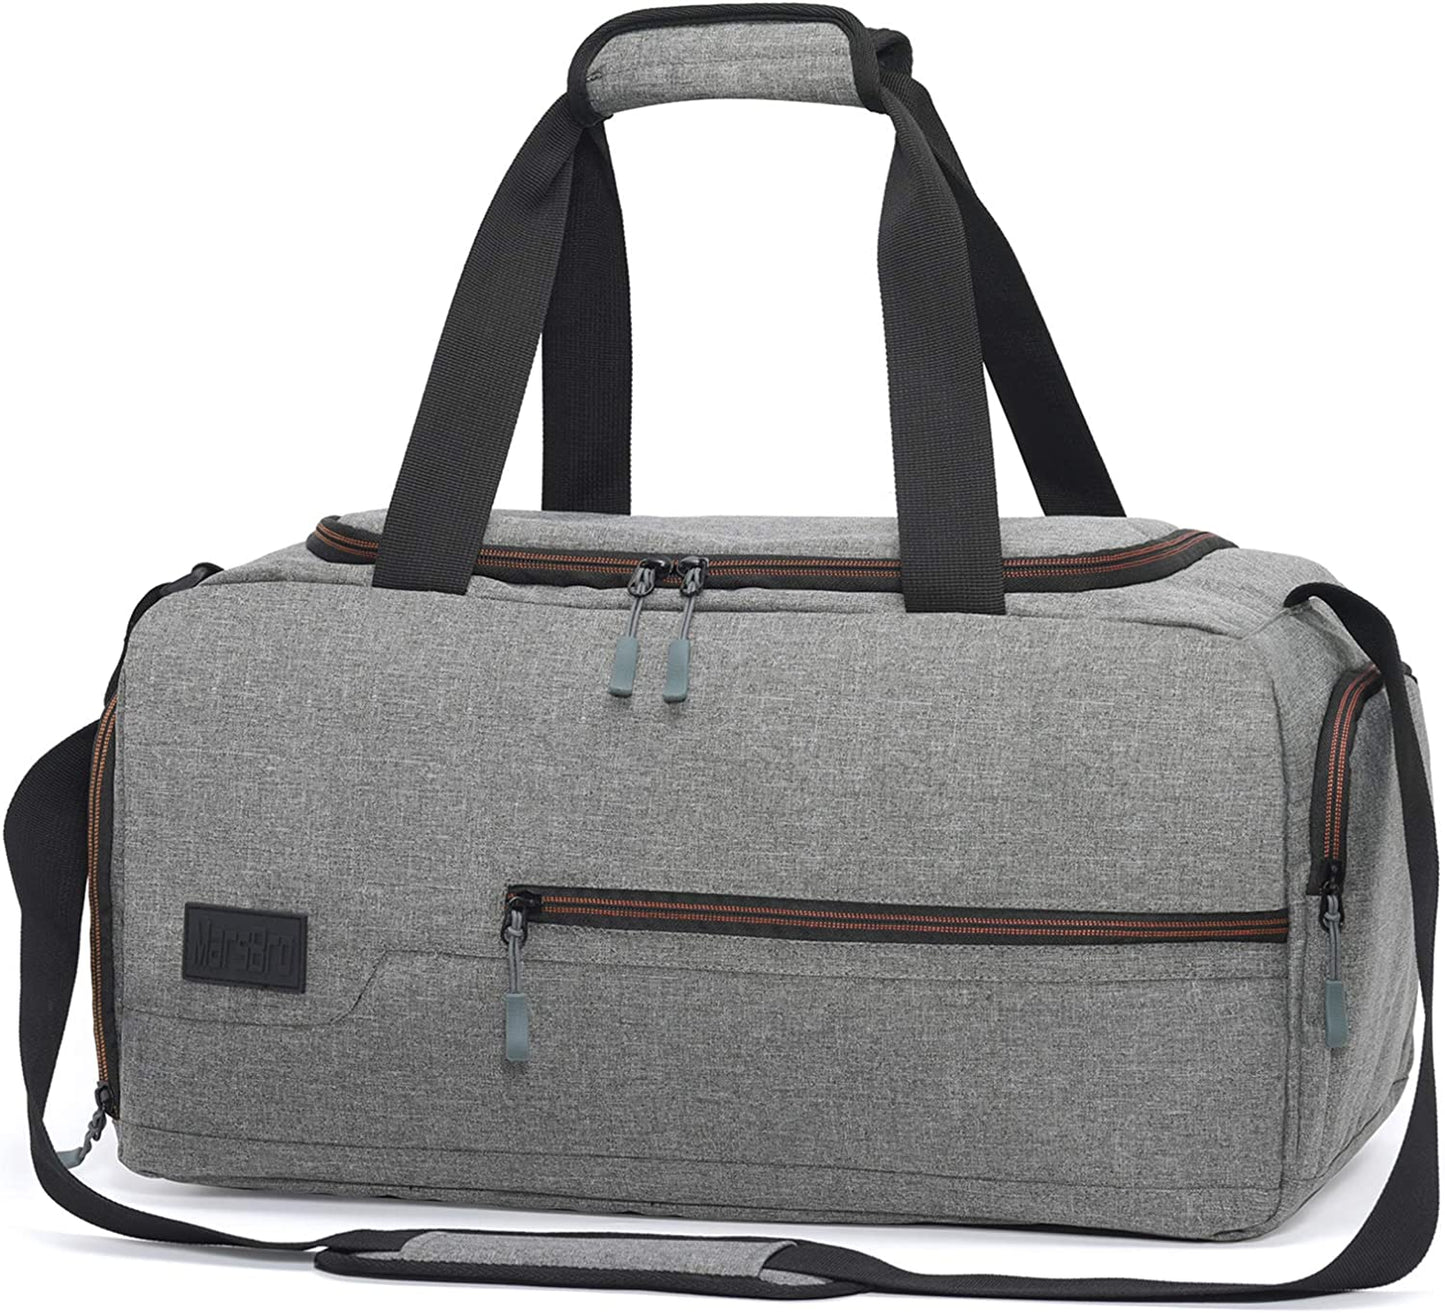 MarsBro Water Resistant Sports Gym Travel Weekender Duffel Bag with Shoe Compartment